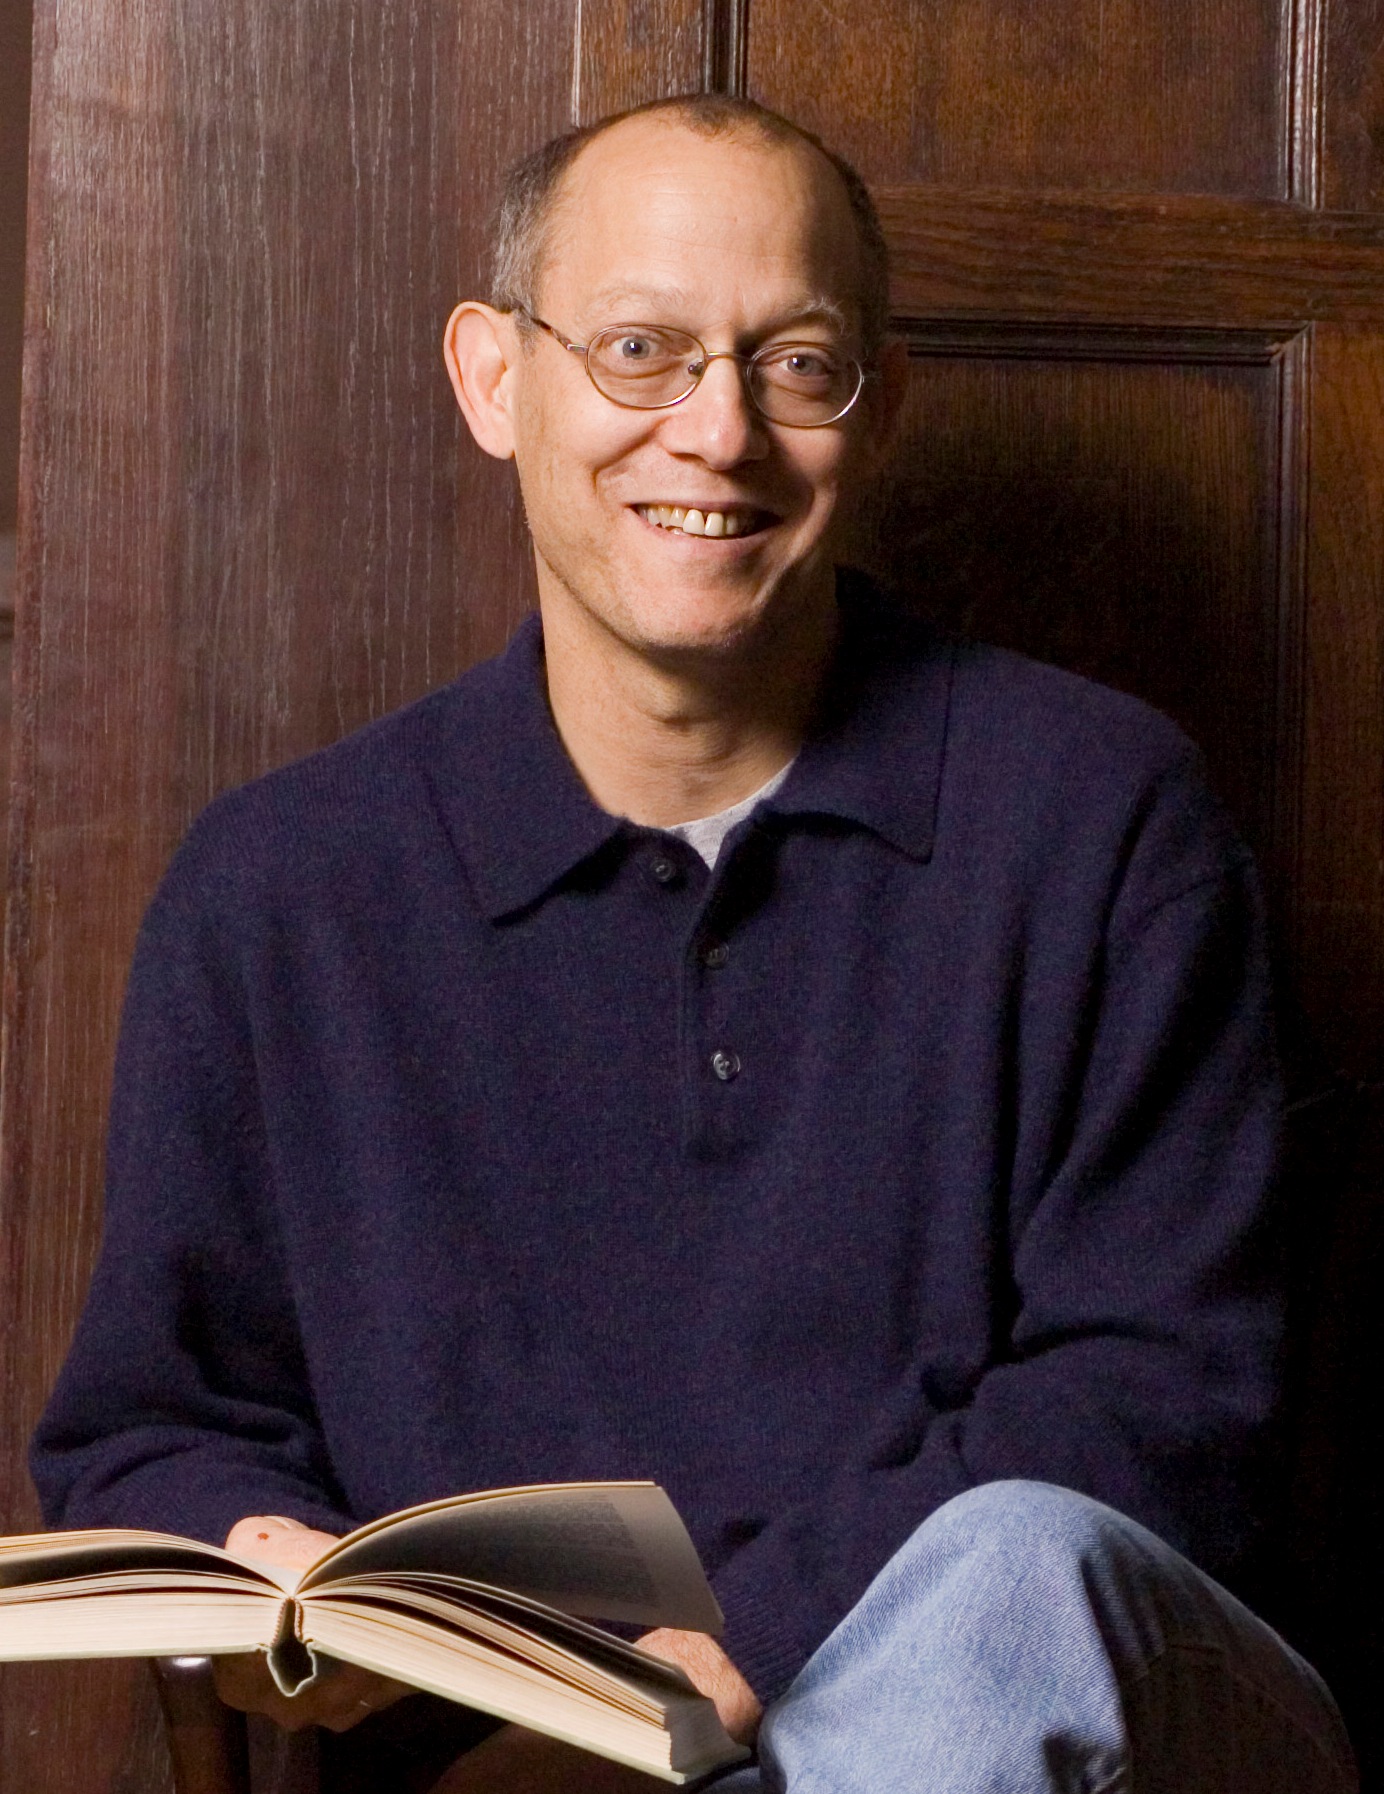 A white man wearing glasses and a purple shirt, holding an open book